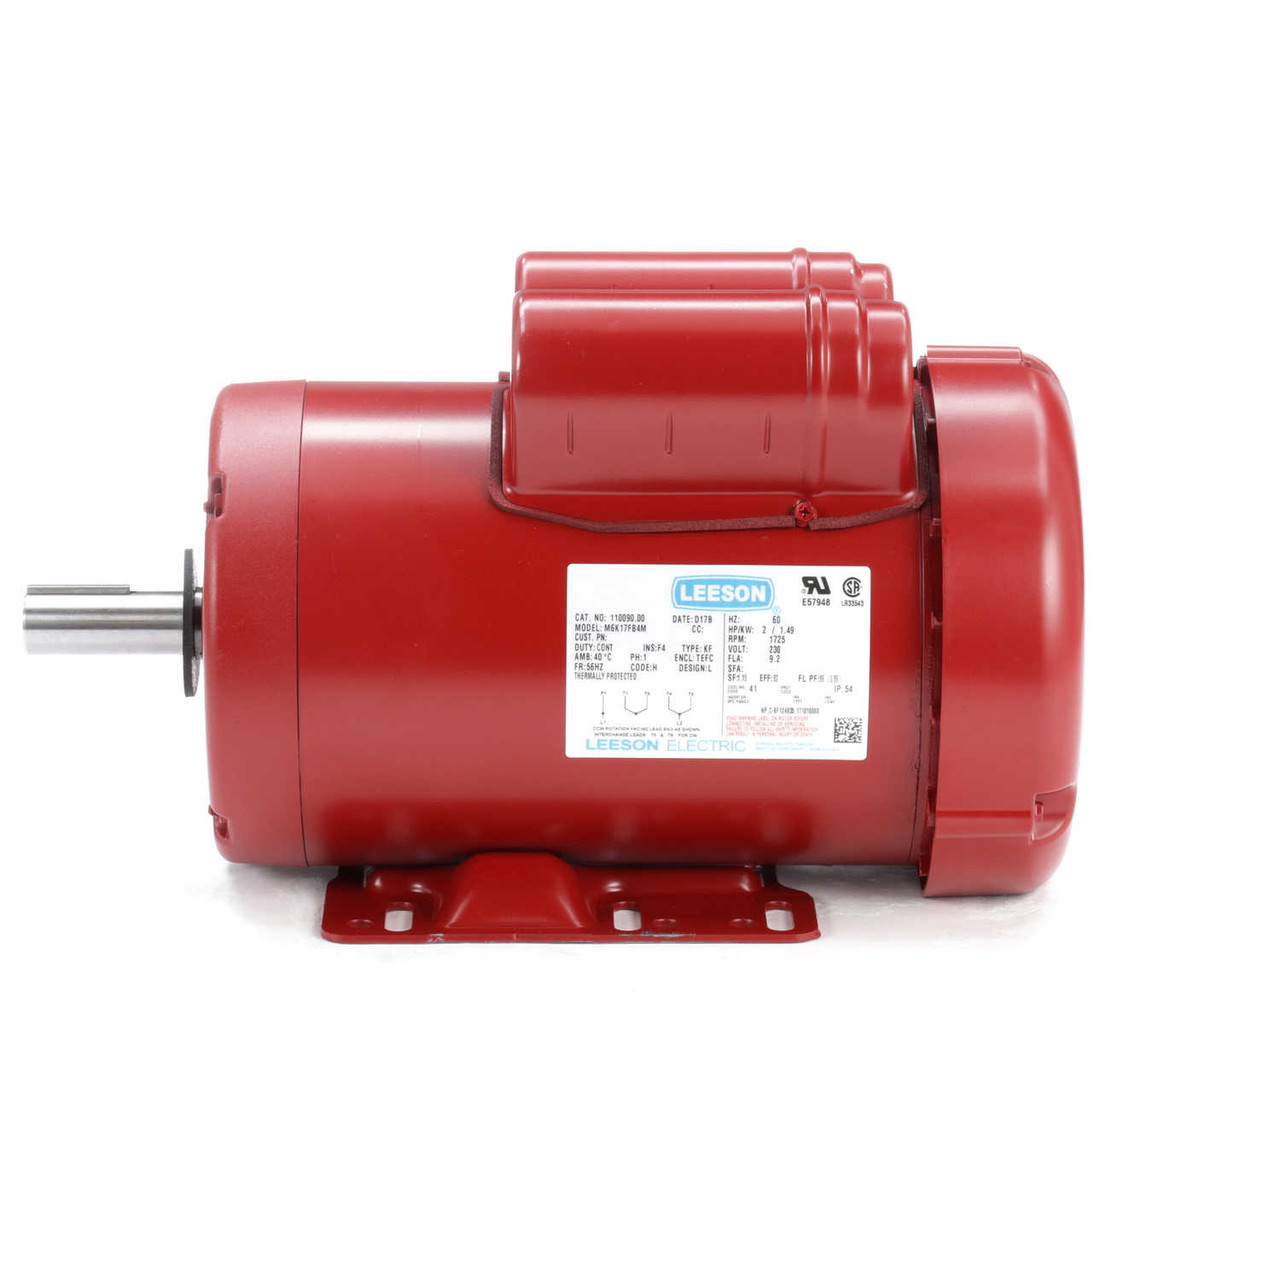 Electric Motor 1/2 hp 1750 RPM Single-Phase TEFC 115 volts,56C Frame 